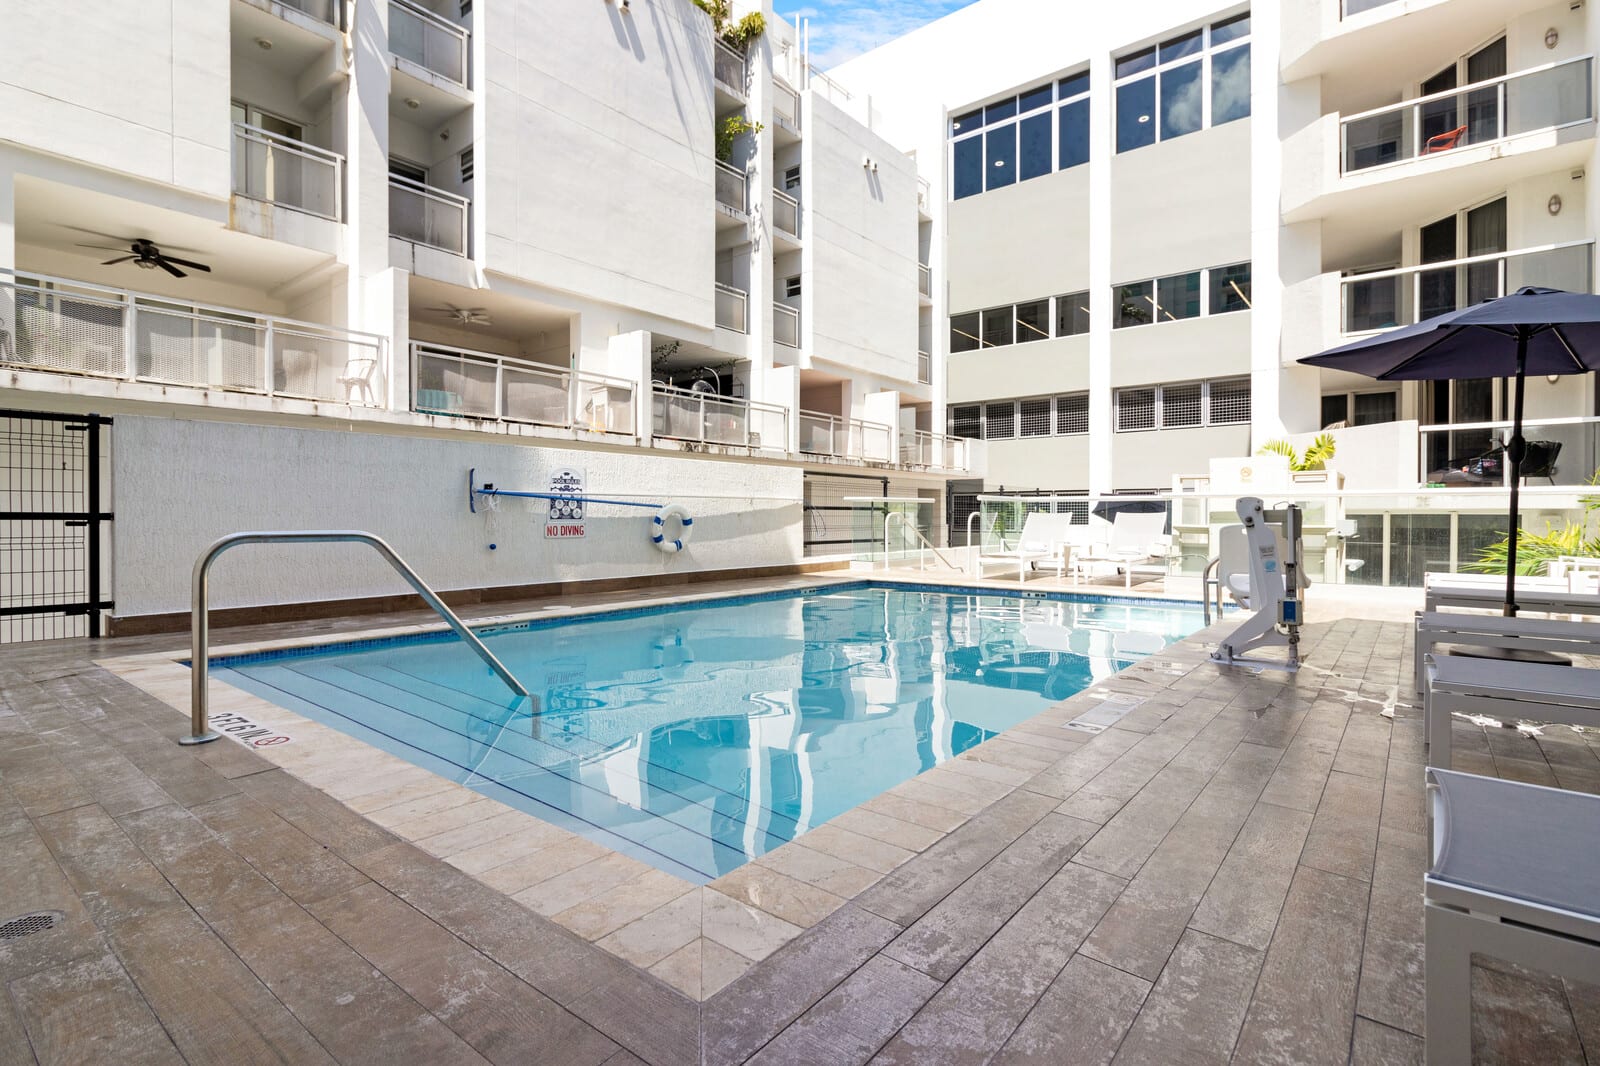 Property Image 2 - Property Manager | 10min to Beach | Gym + Pool | Brickell